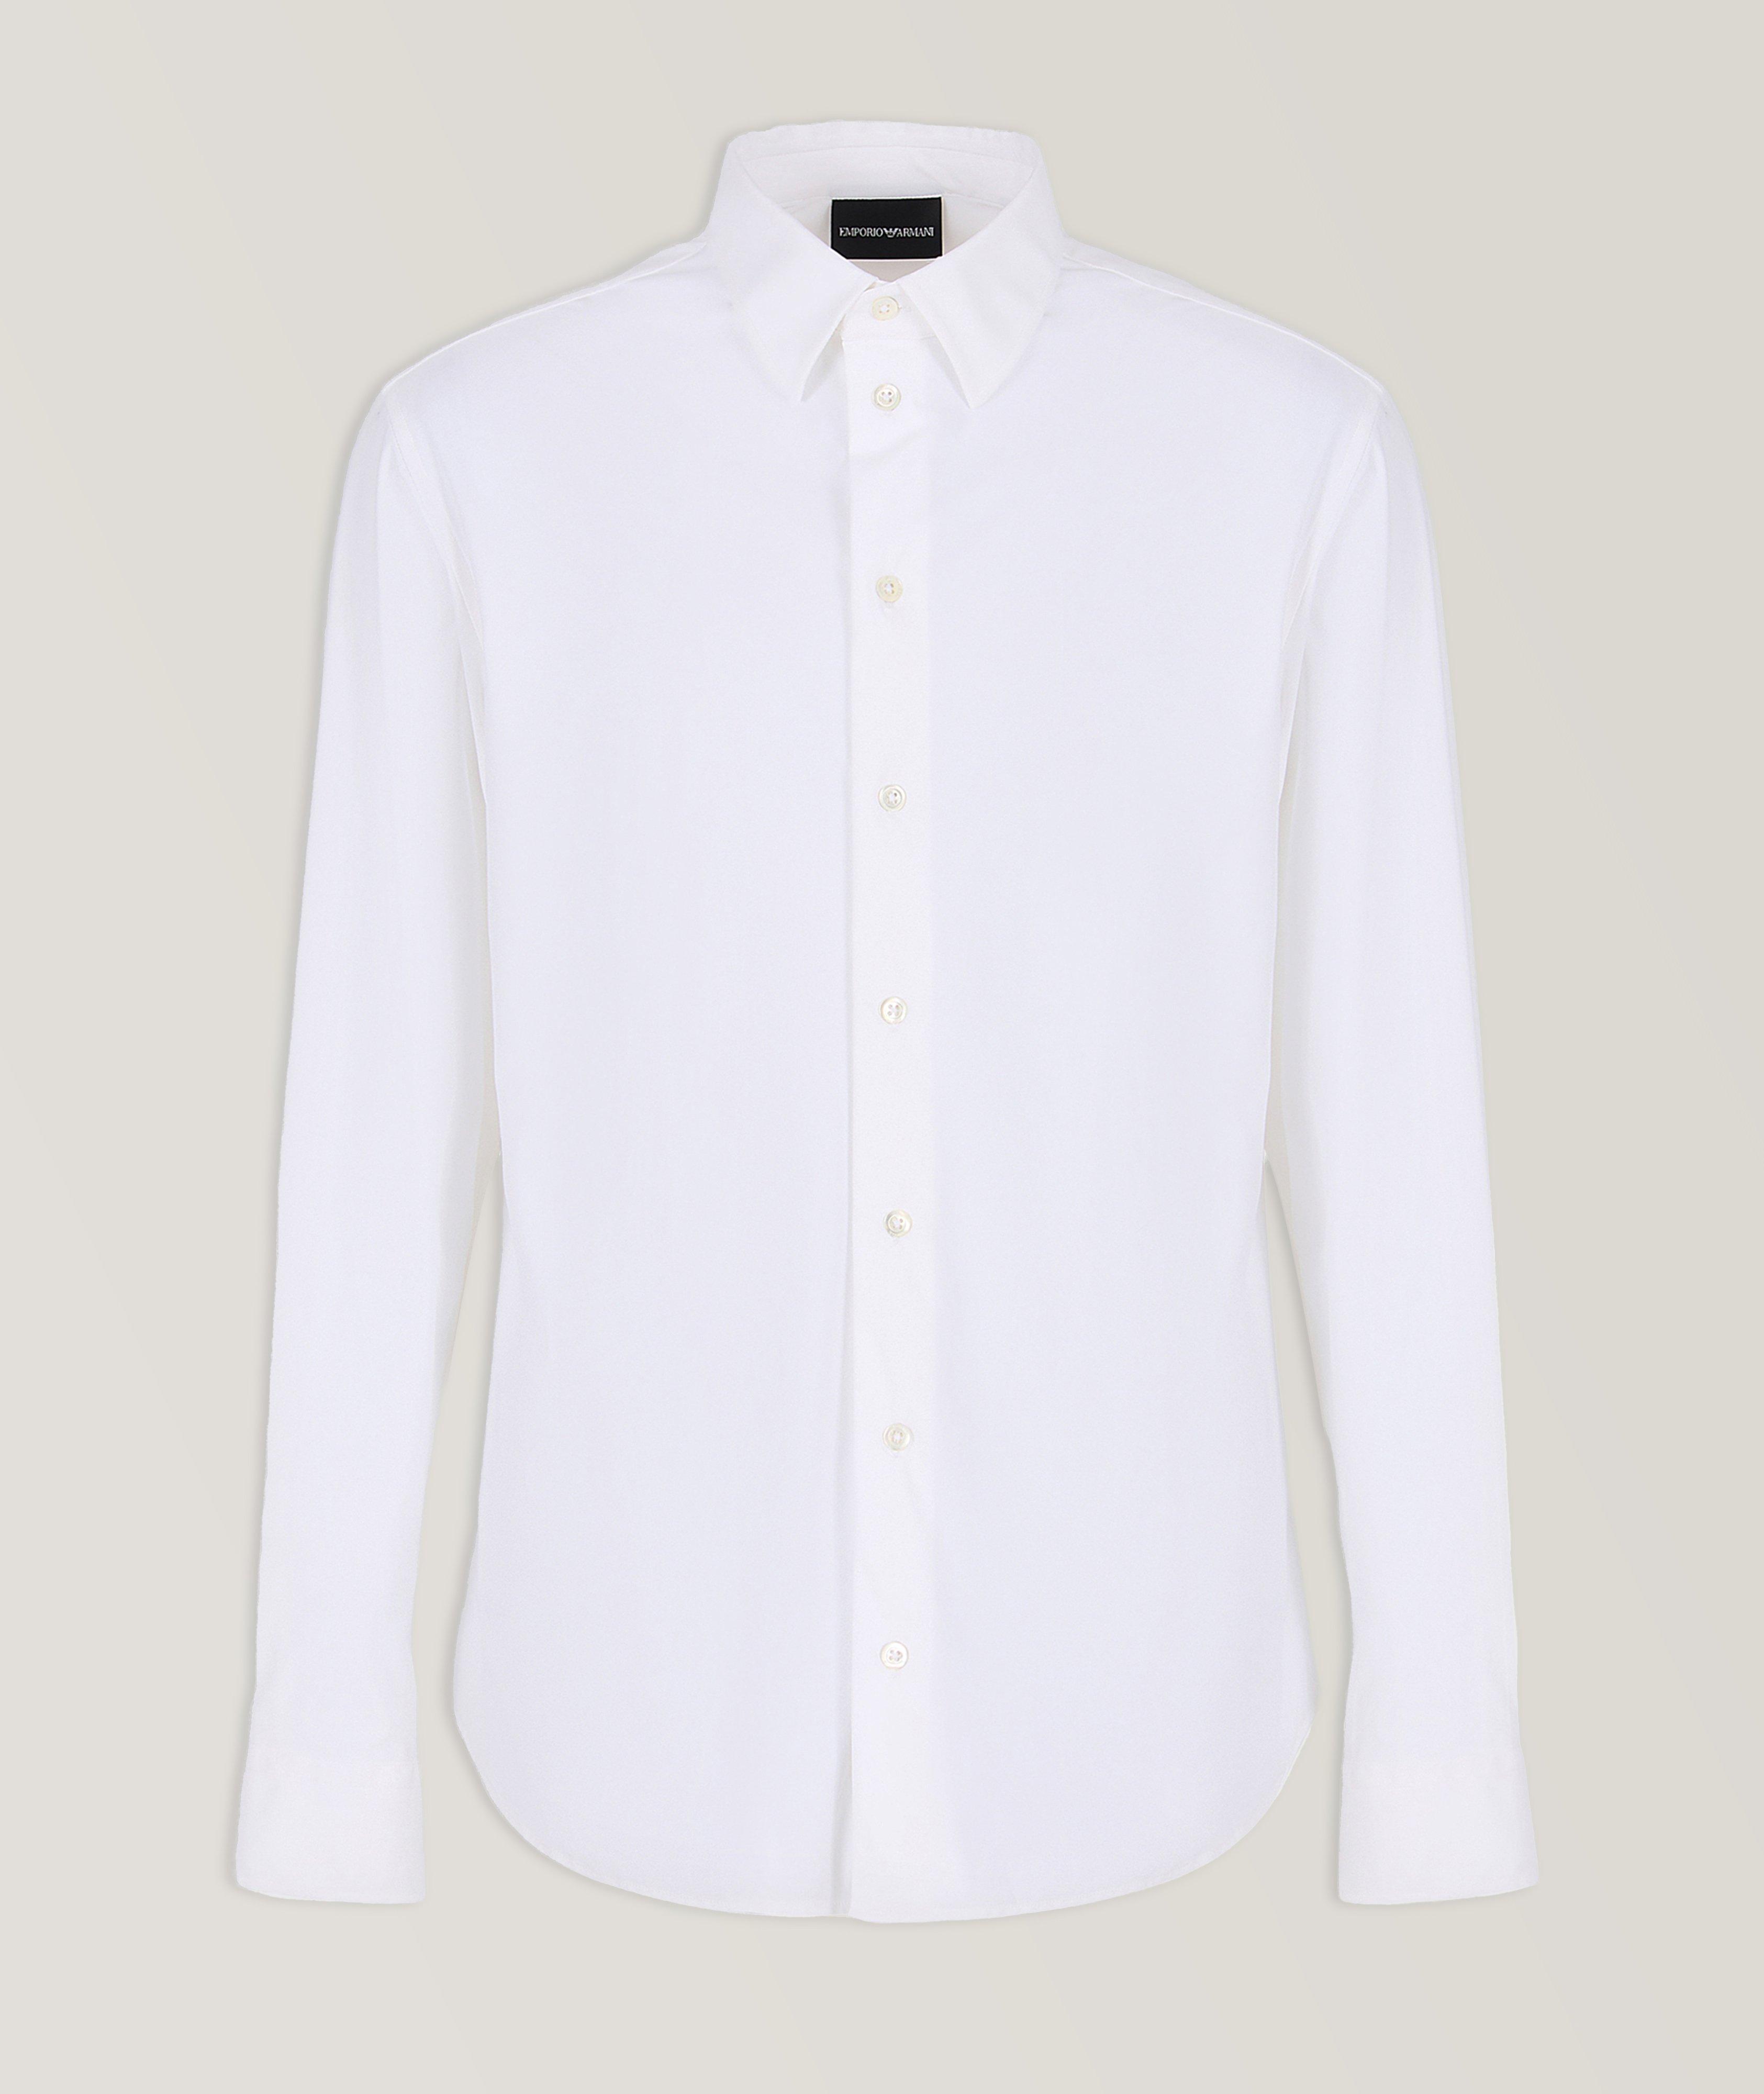 Solid Technical Stretch Sport Shirt image 0